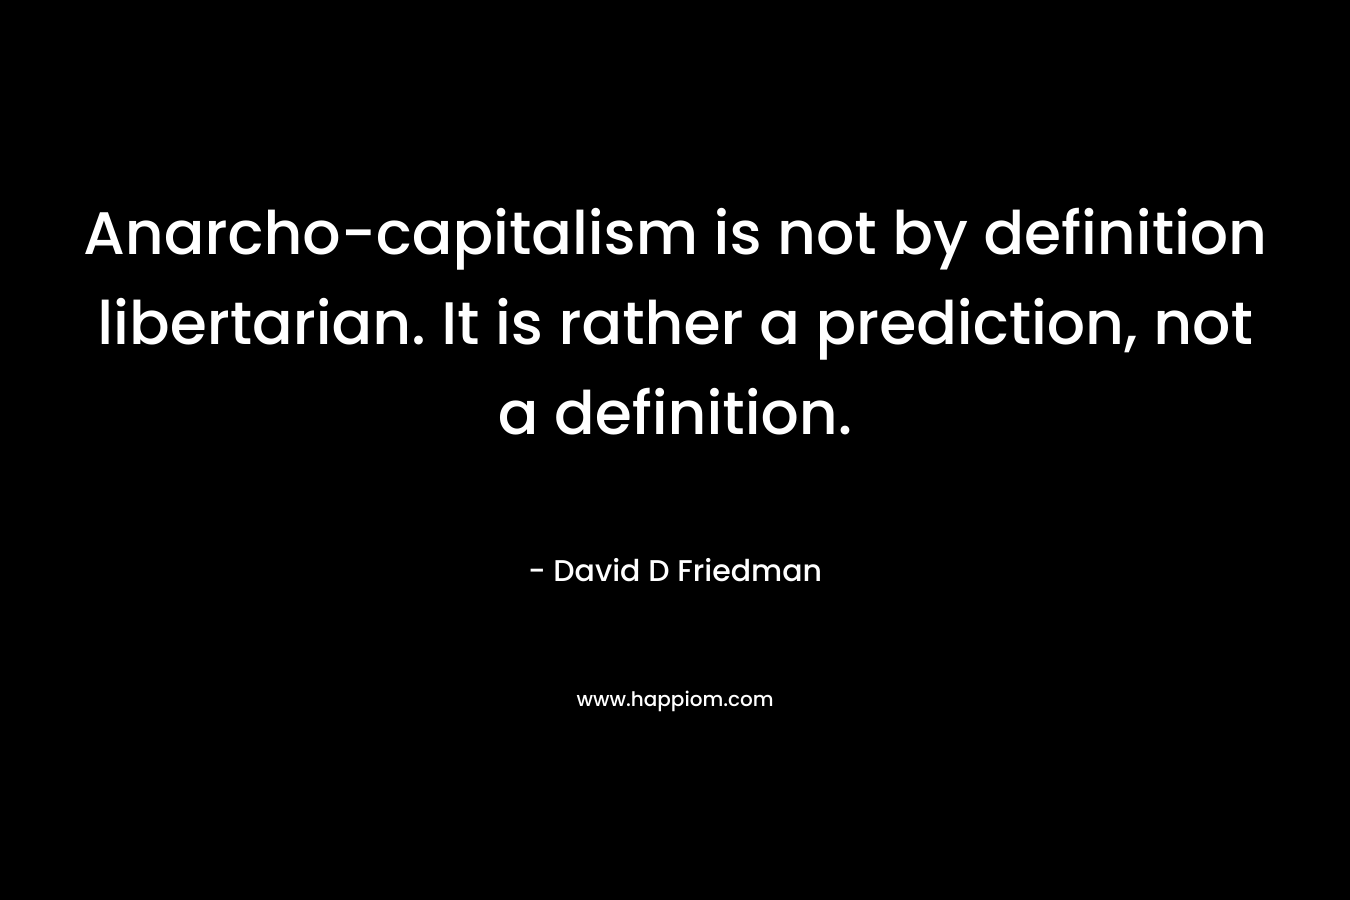 Anarcho-capitalism is not by definition libertarian. It is rather a prediction, not a definition.